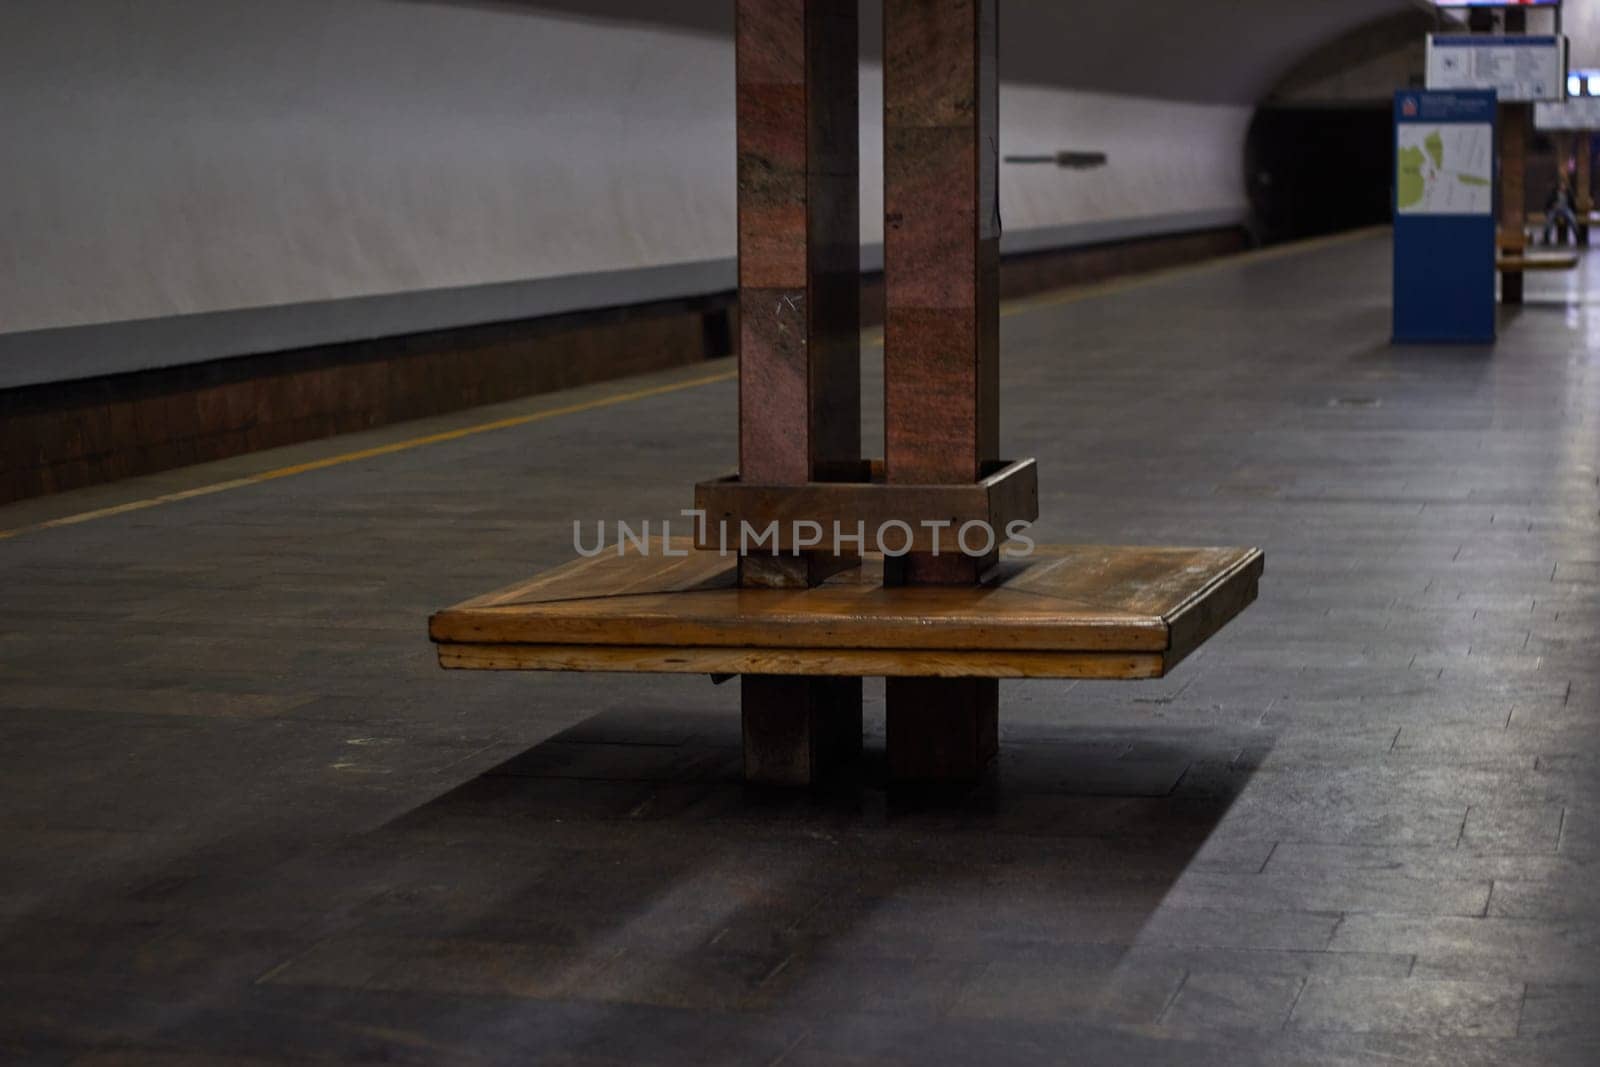 Metro station benches for rest. Underground. Metropolitan. Travel by public transport.